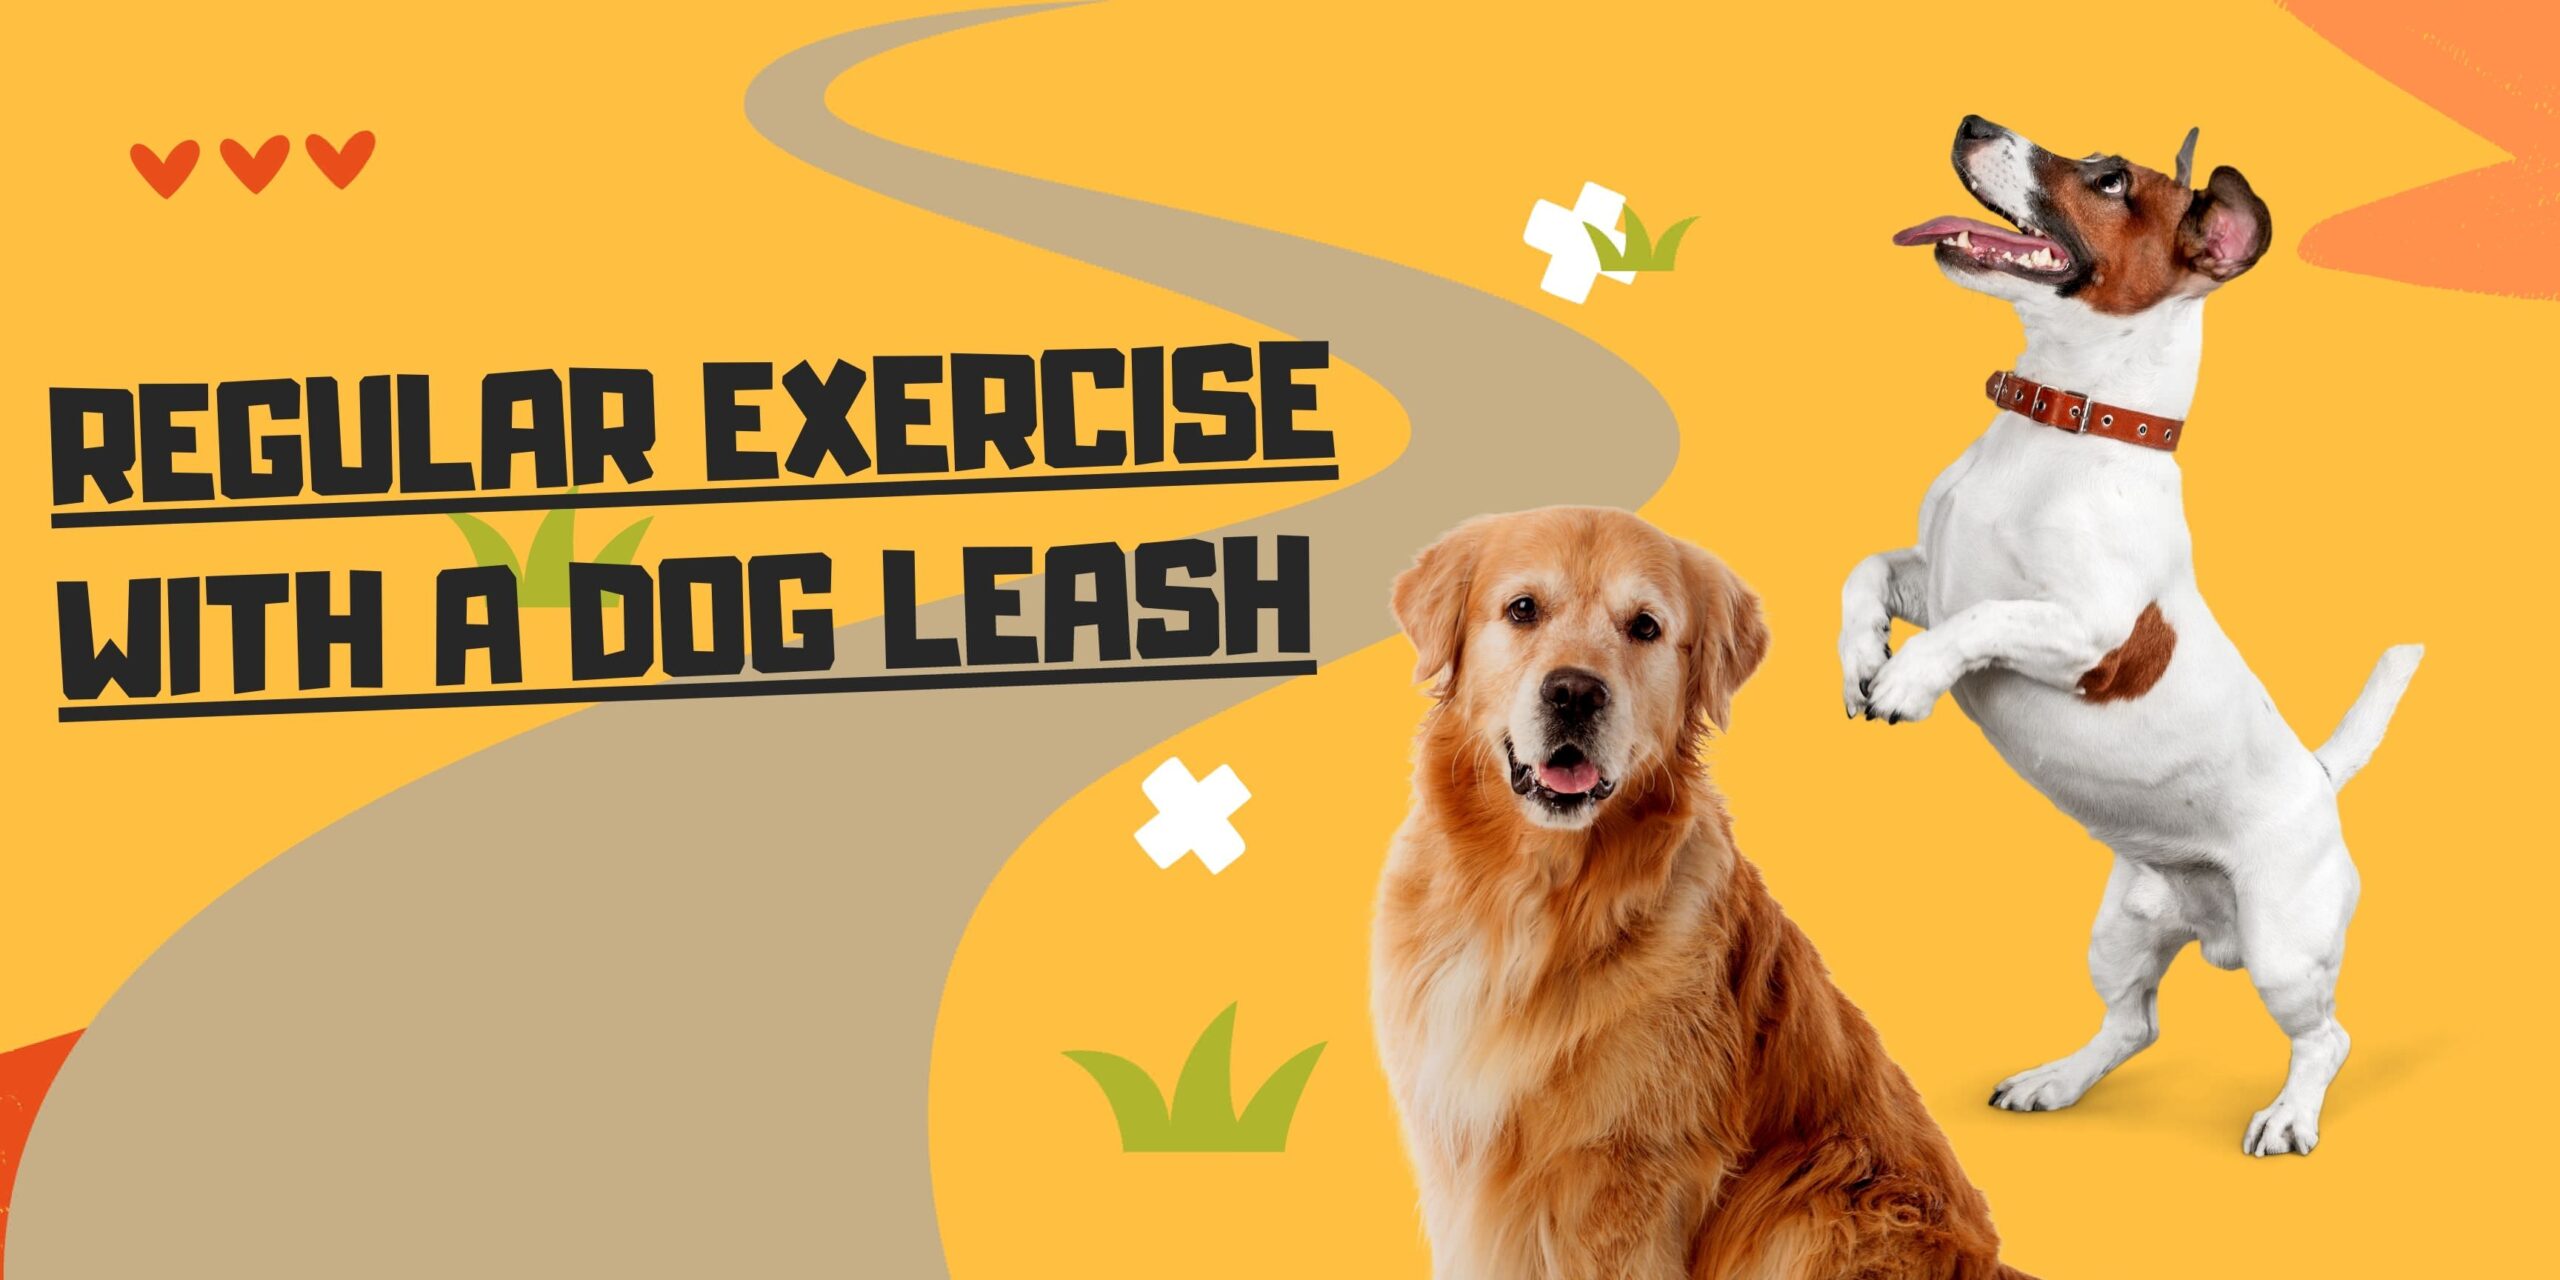 Transform Your Routine with Regular Exercise Using a Dog Leash